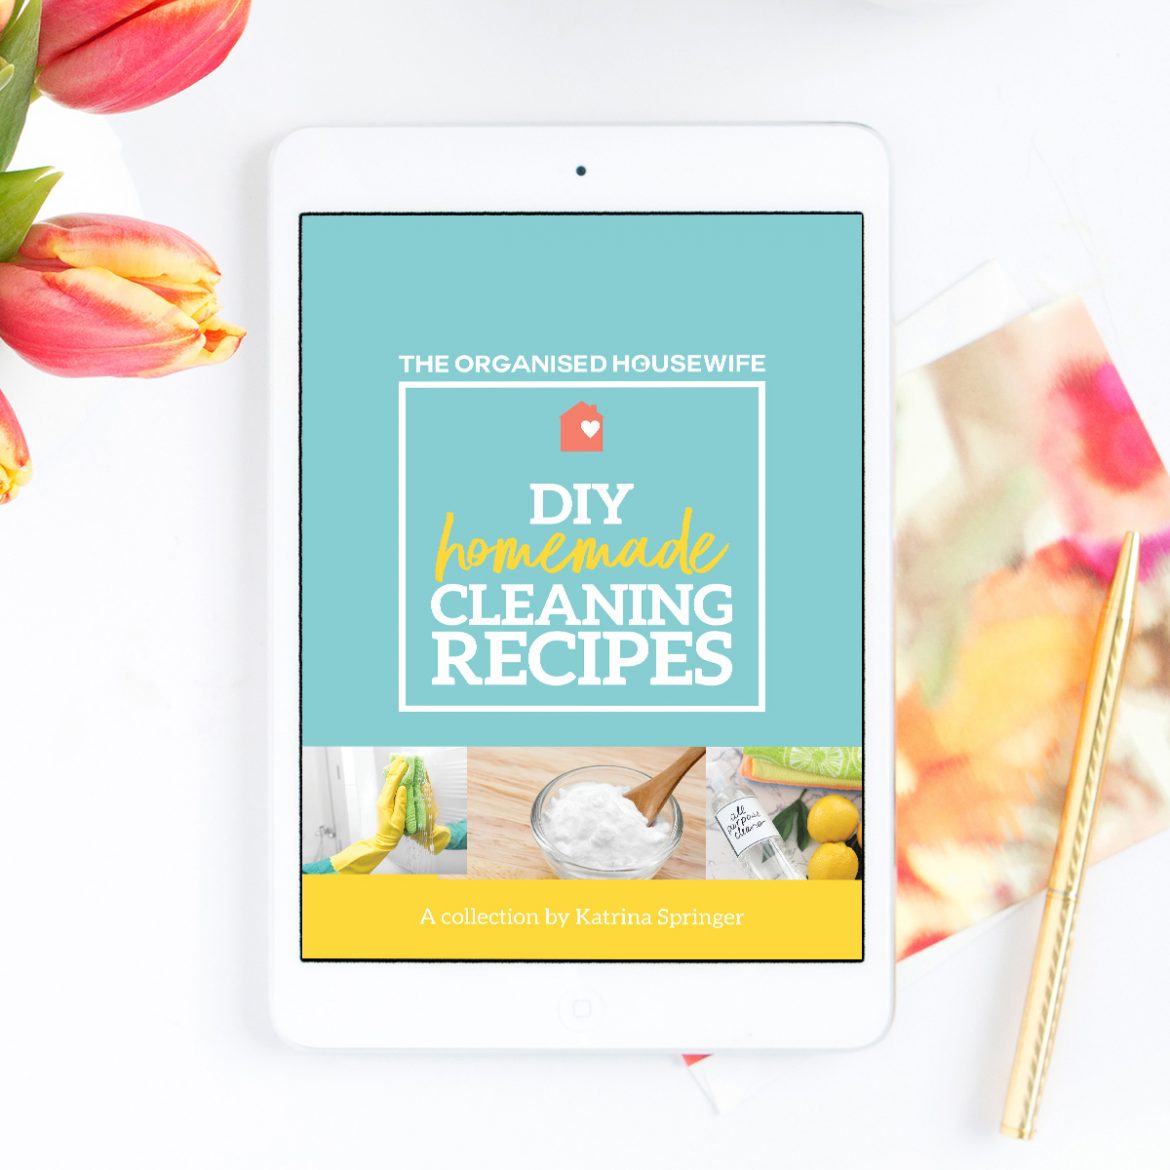 This 28 page instant downloadable eBook includes practical Homemade Cleaning Recipes to help save you money and reduce chemicals and toxins in your home. It's a convenient and easy reference, with step by step instructions, using products you more than likely already have in your pantry. There are recipes for cleaning the kitchen, bathroom, floors, carpets and more.